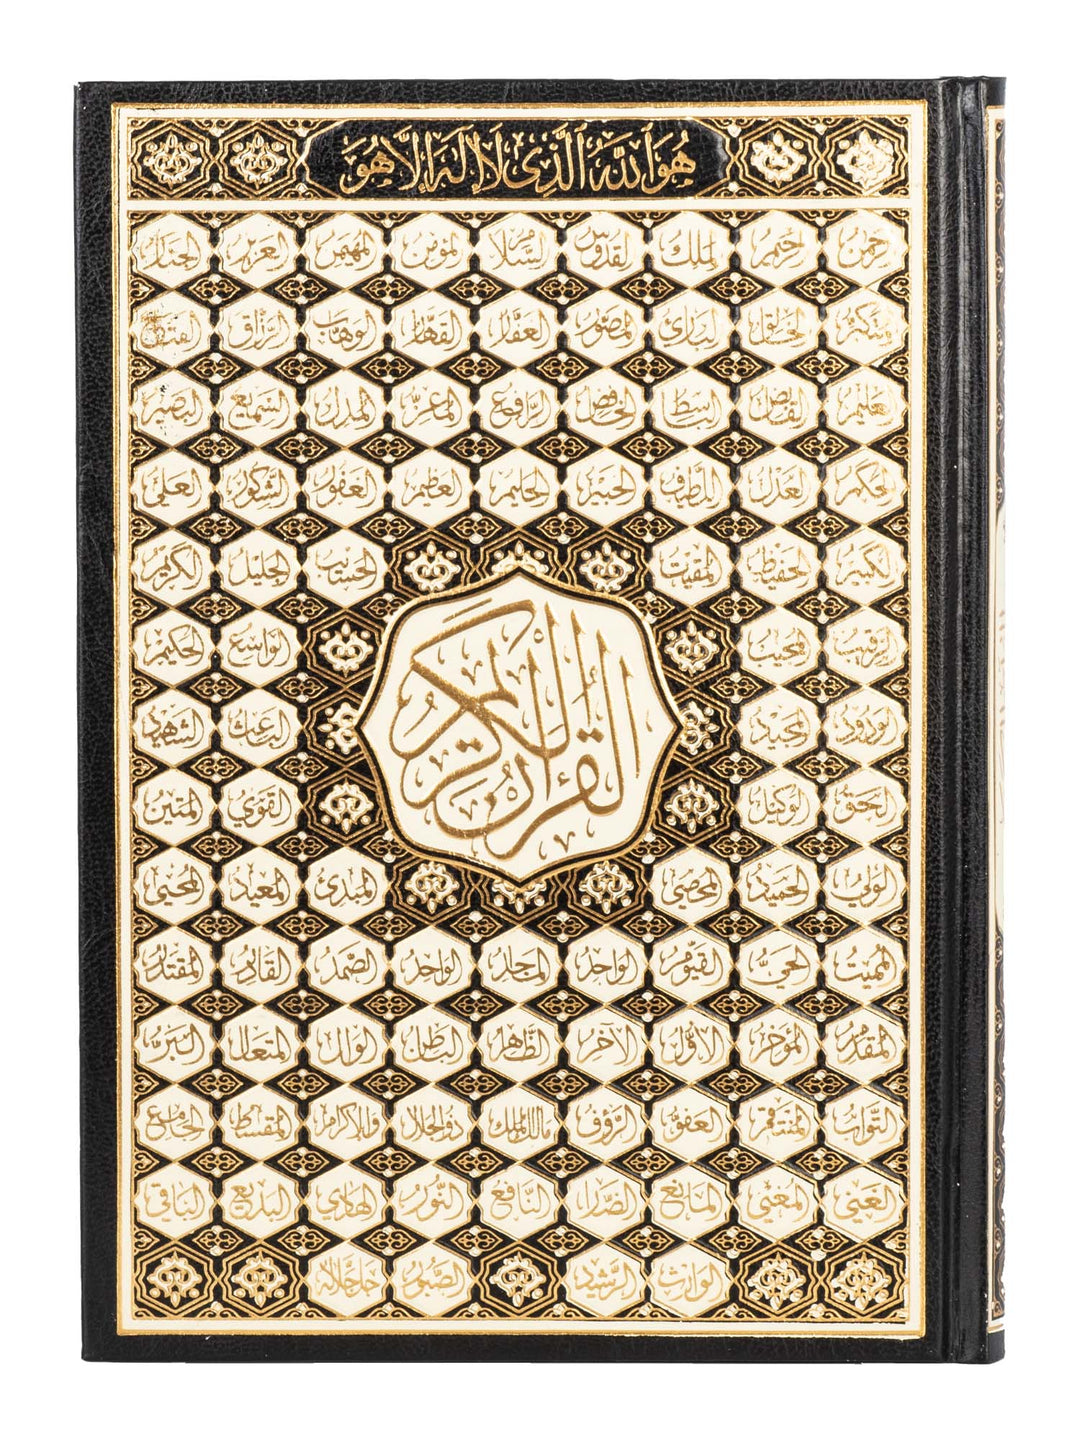 The Holy Quran - 15 Line Uthmani Script - Medium (~A5) Size - 99 Names of Allah Cover